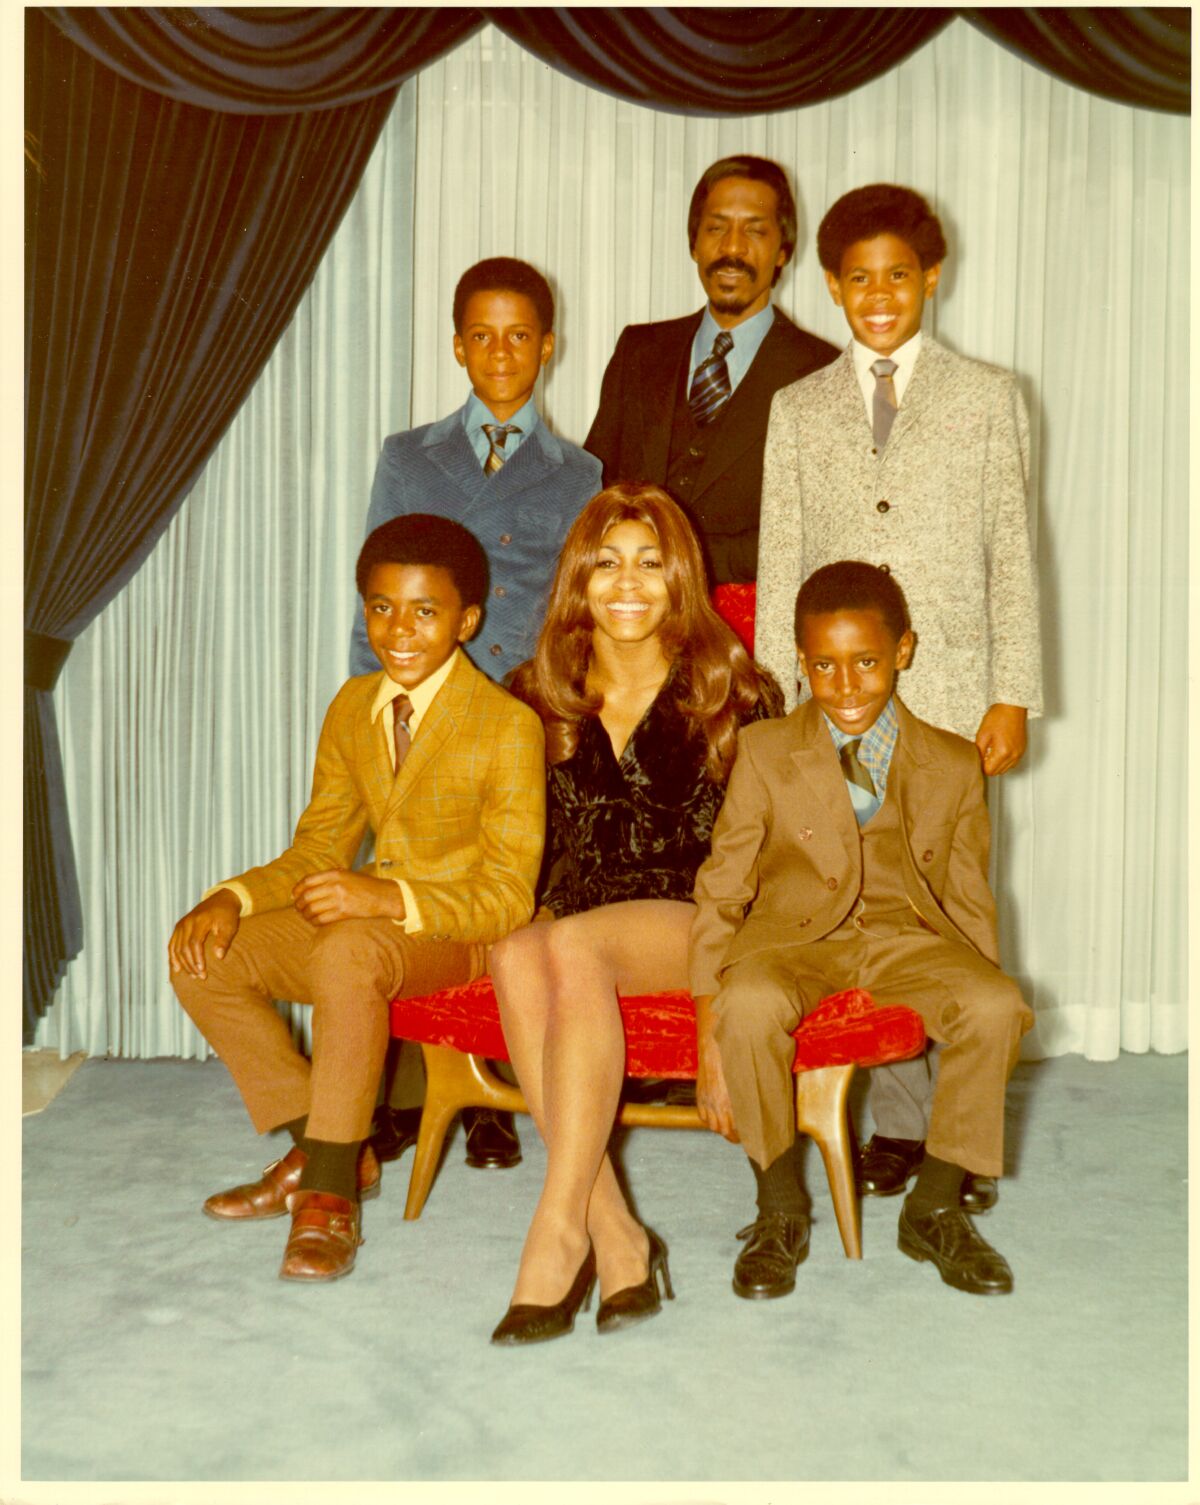 Ike and Tina Turner pose for a portrait with their son and step-sons 